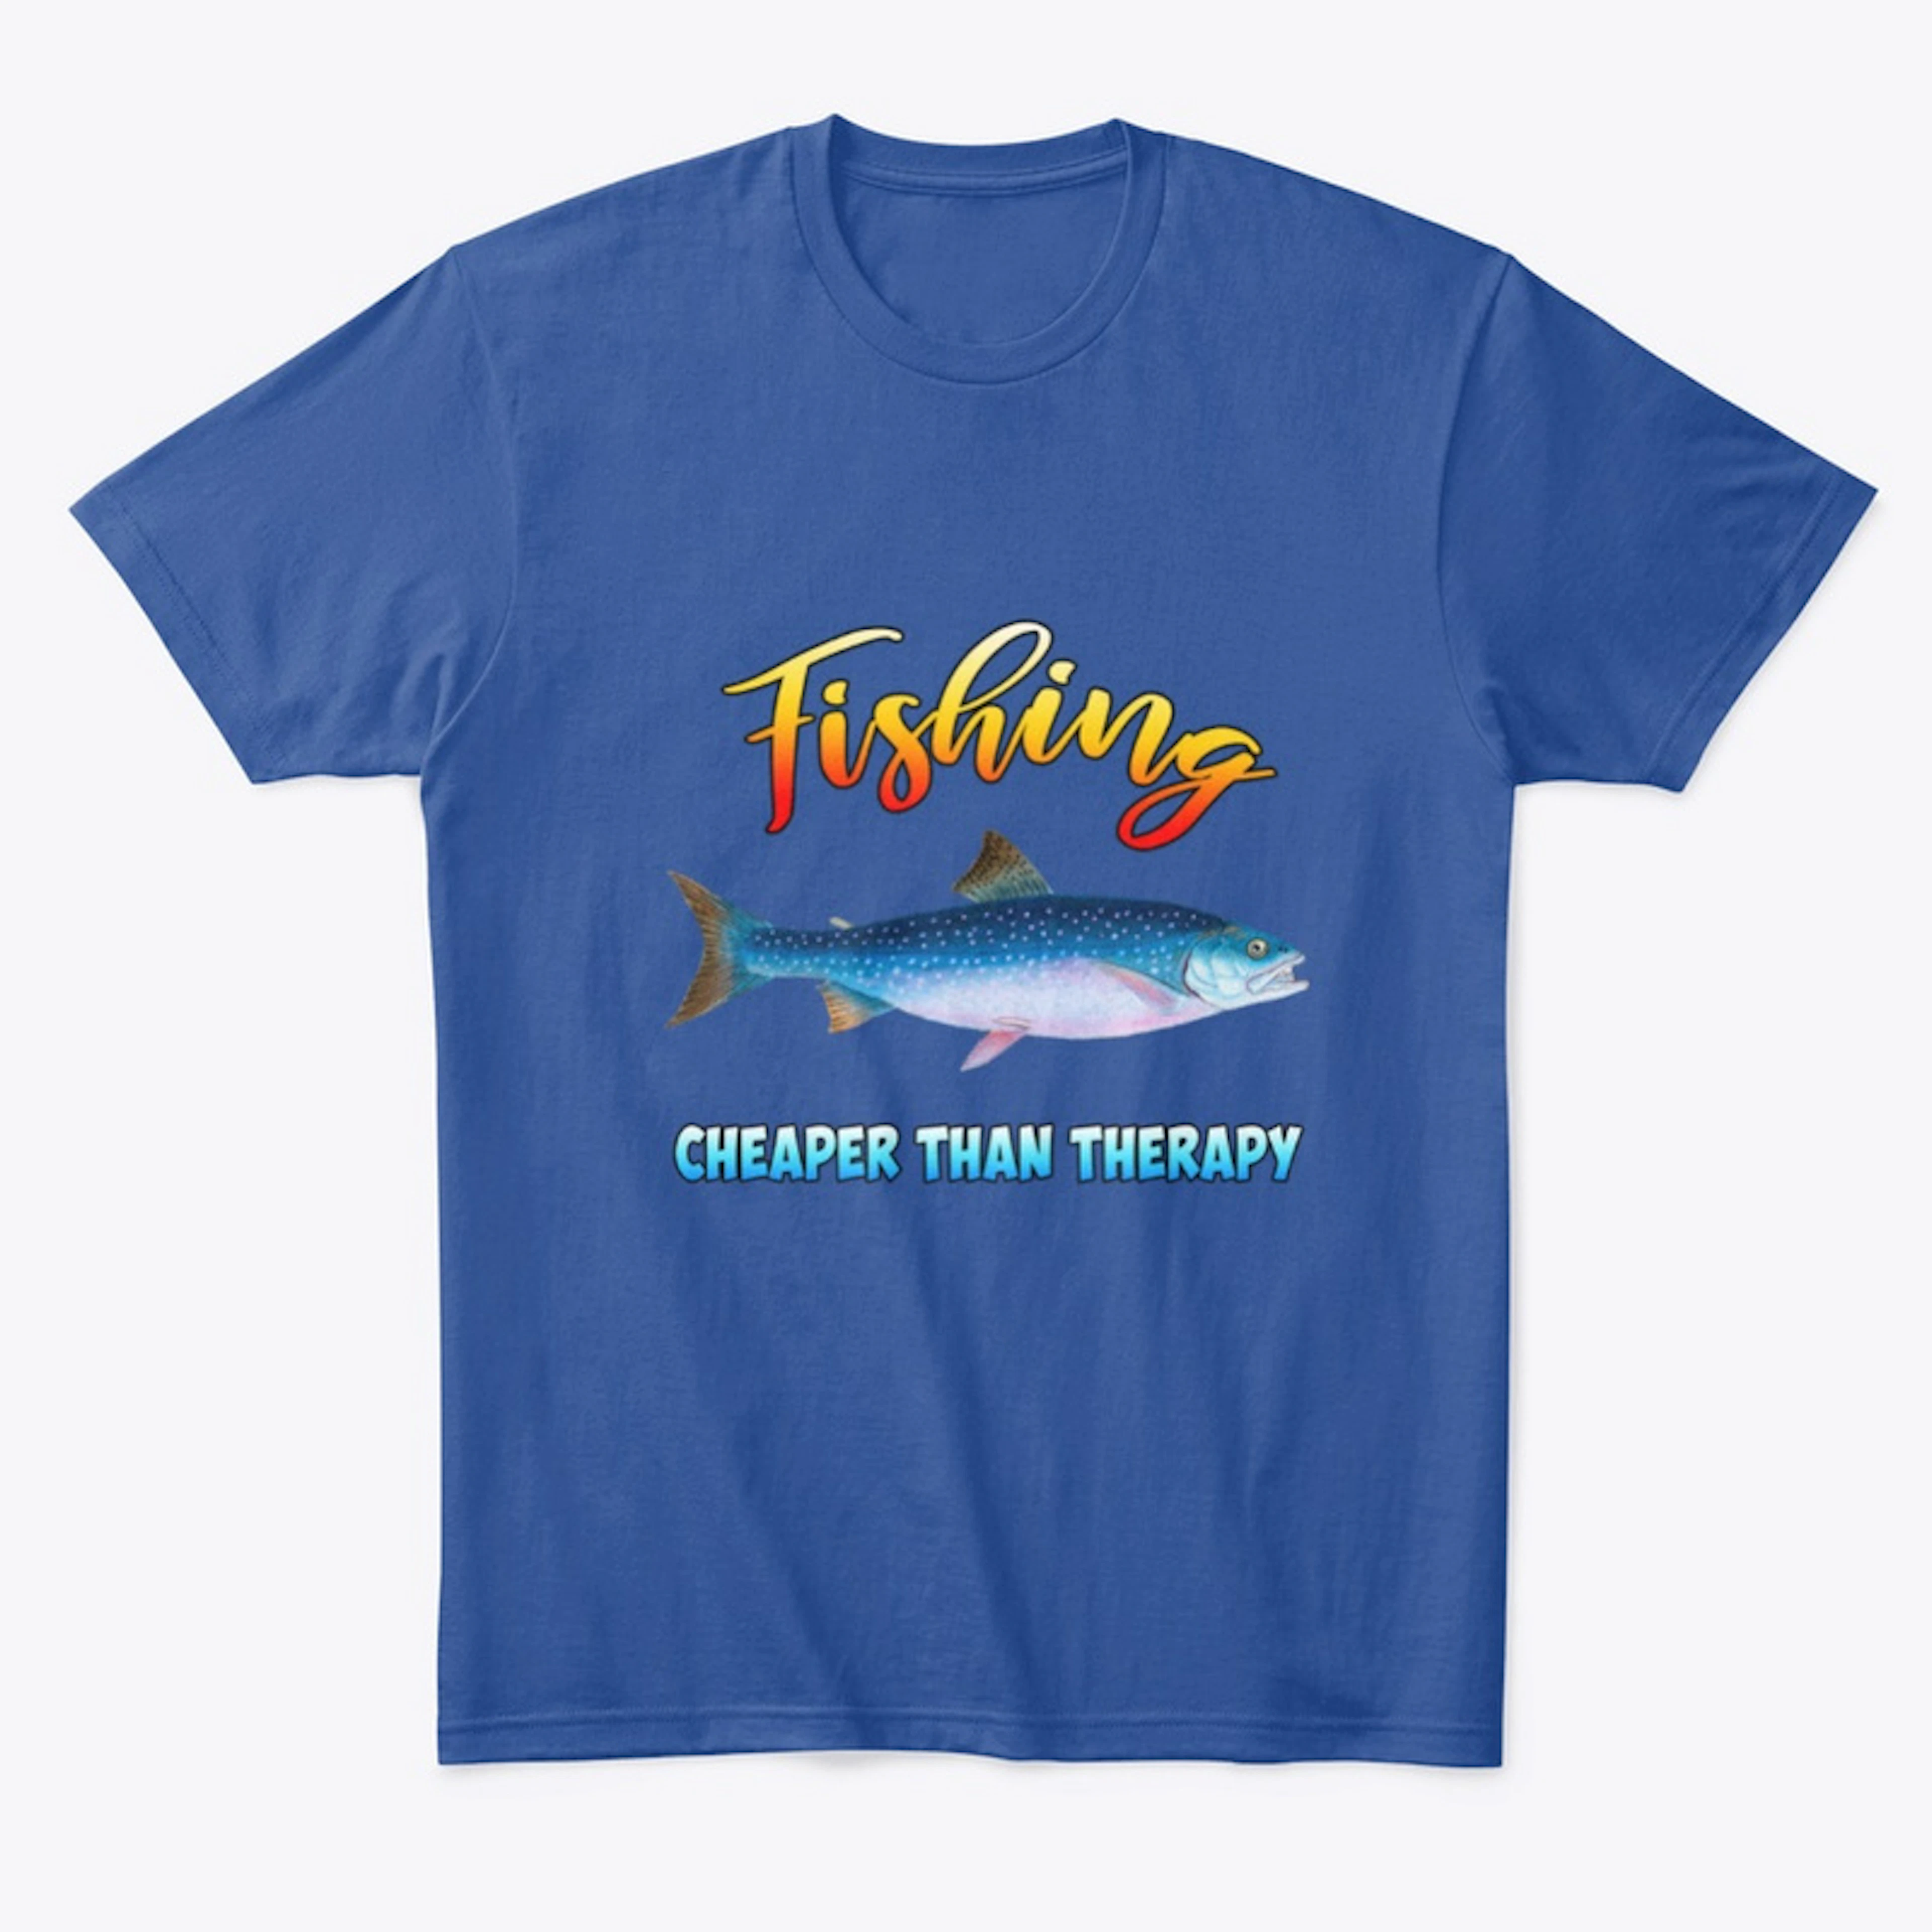 Fishing - Cheaper than therapy